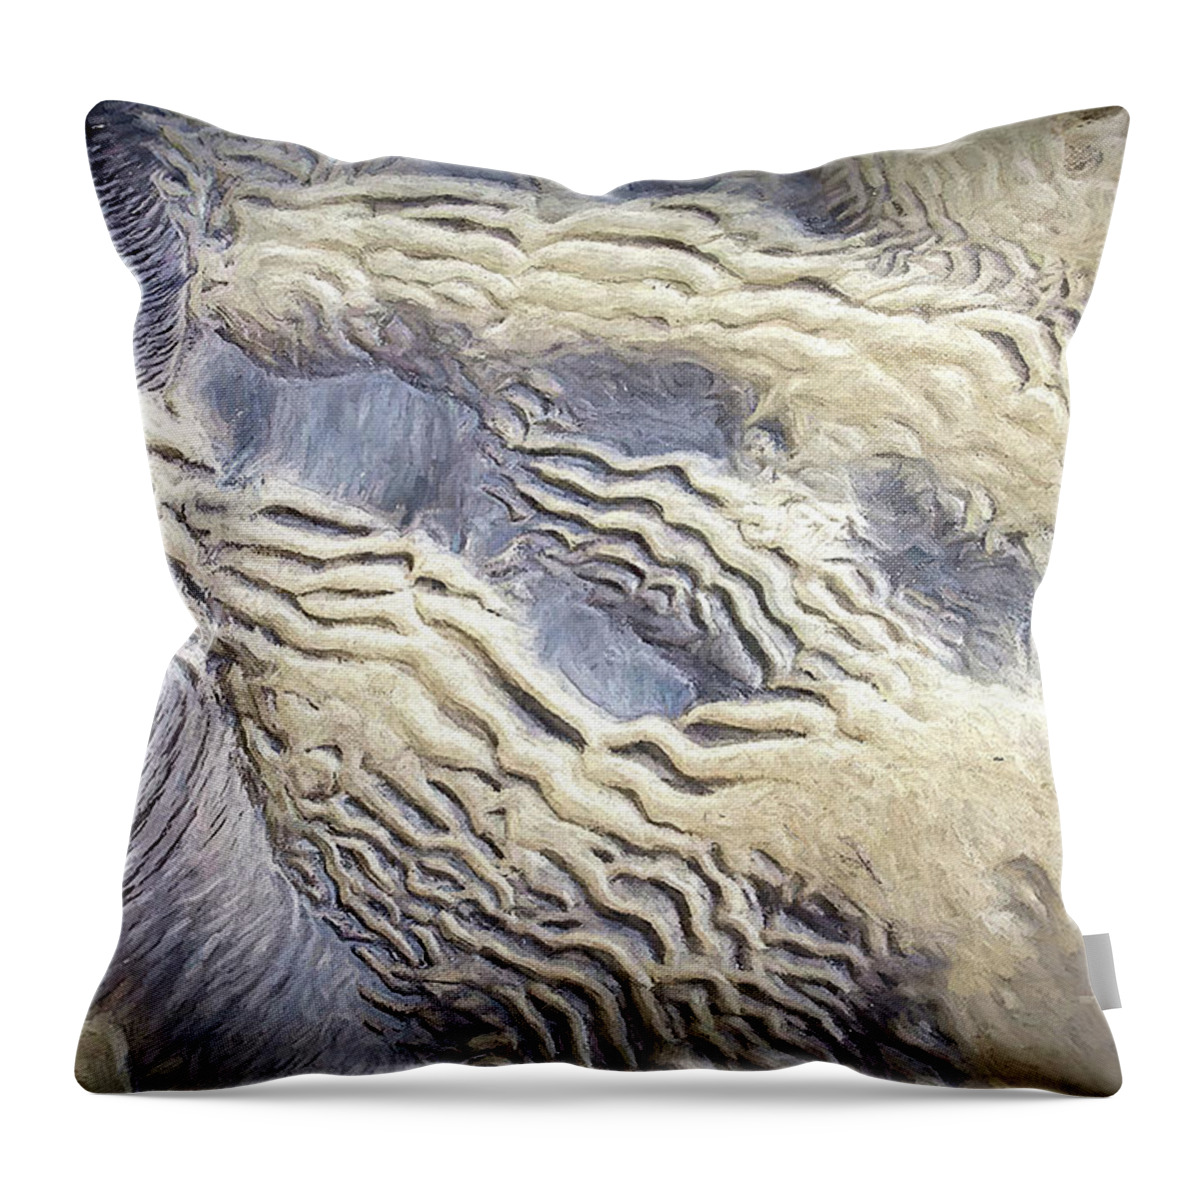 Abstract Print Throw Pillow featuring the photograph River Bottom Abstract by Phil Mancuso